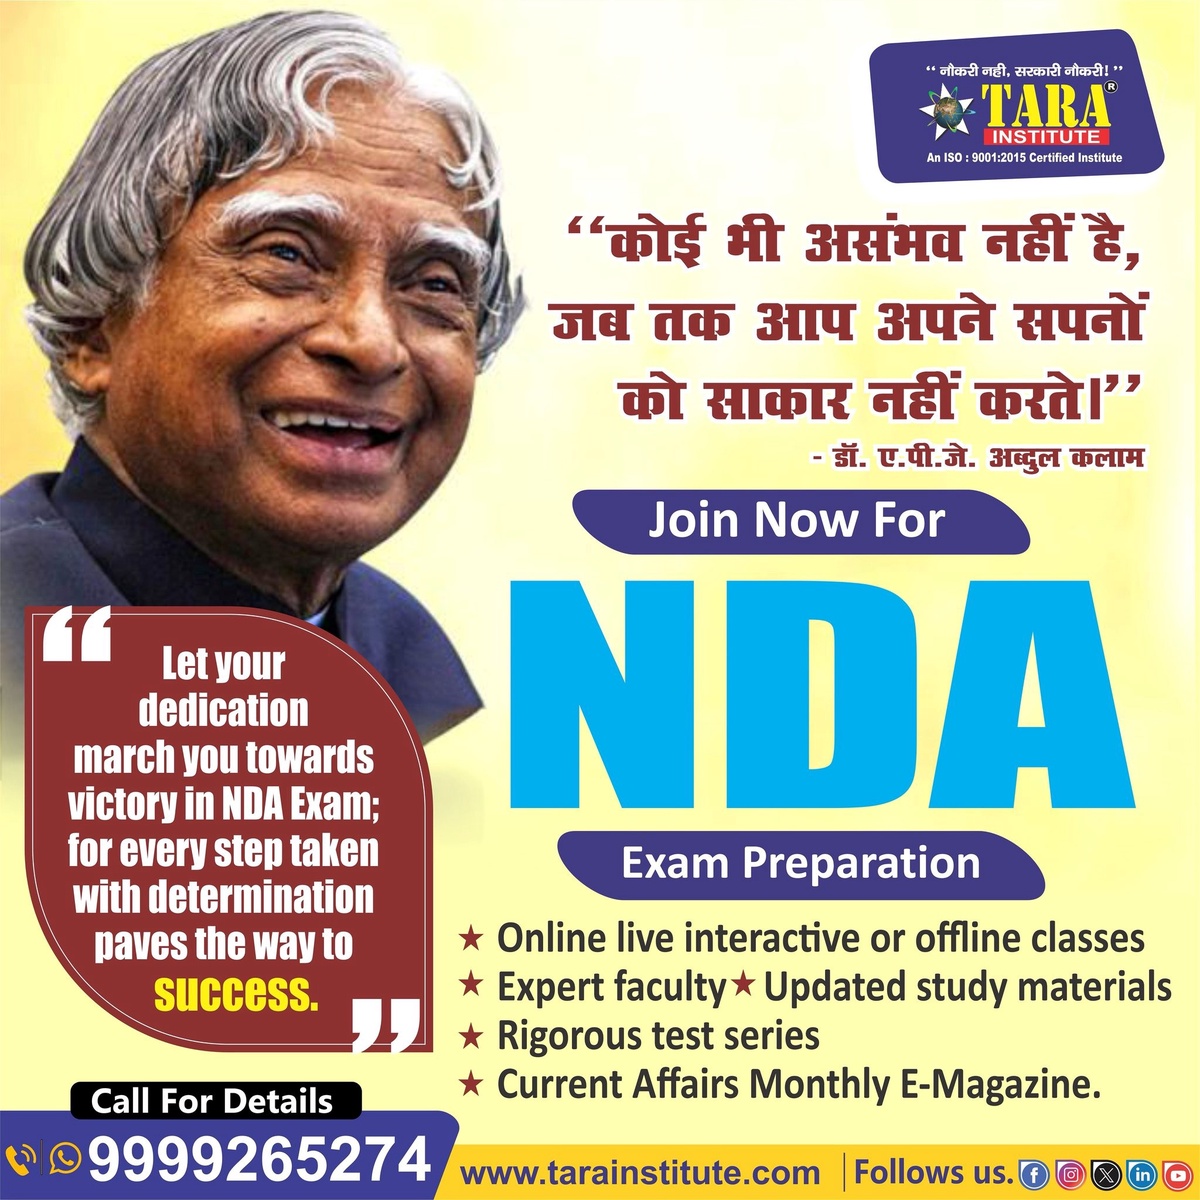 Why Choose NDA Coaching in Delhi for Your Defence Aspirations?